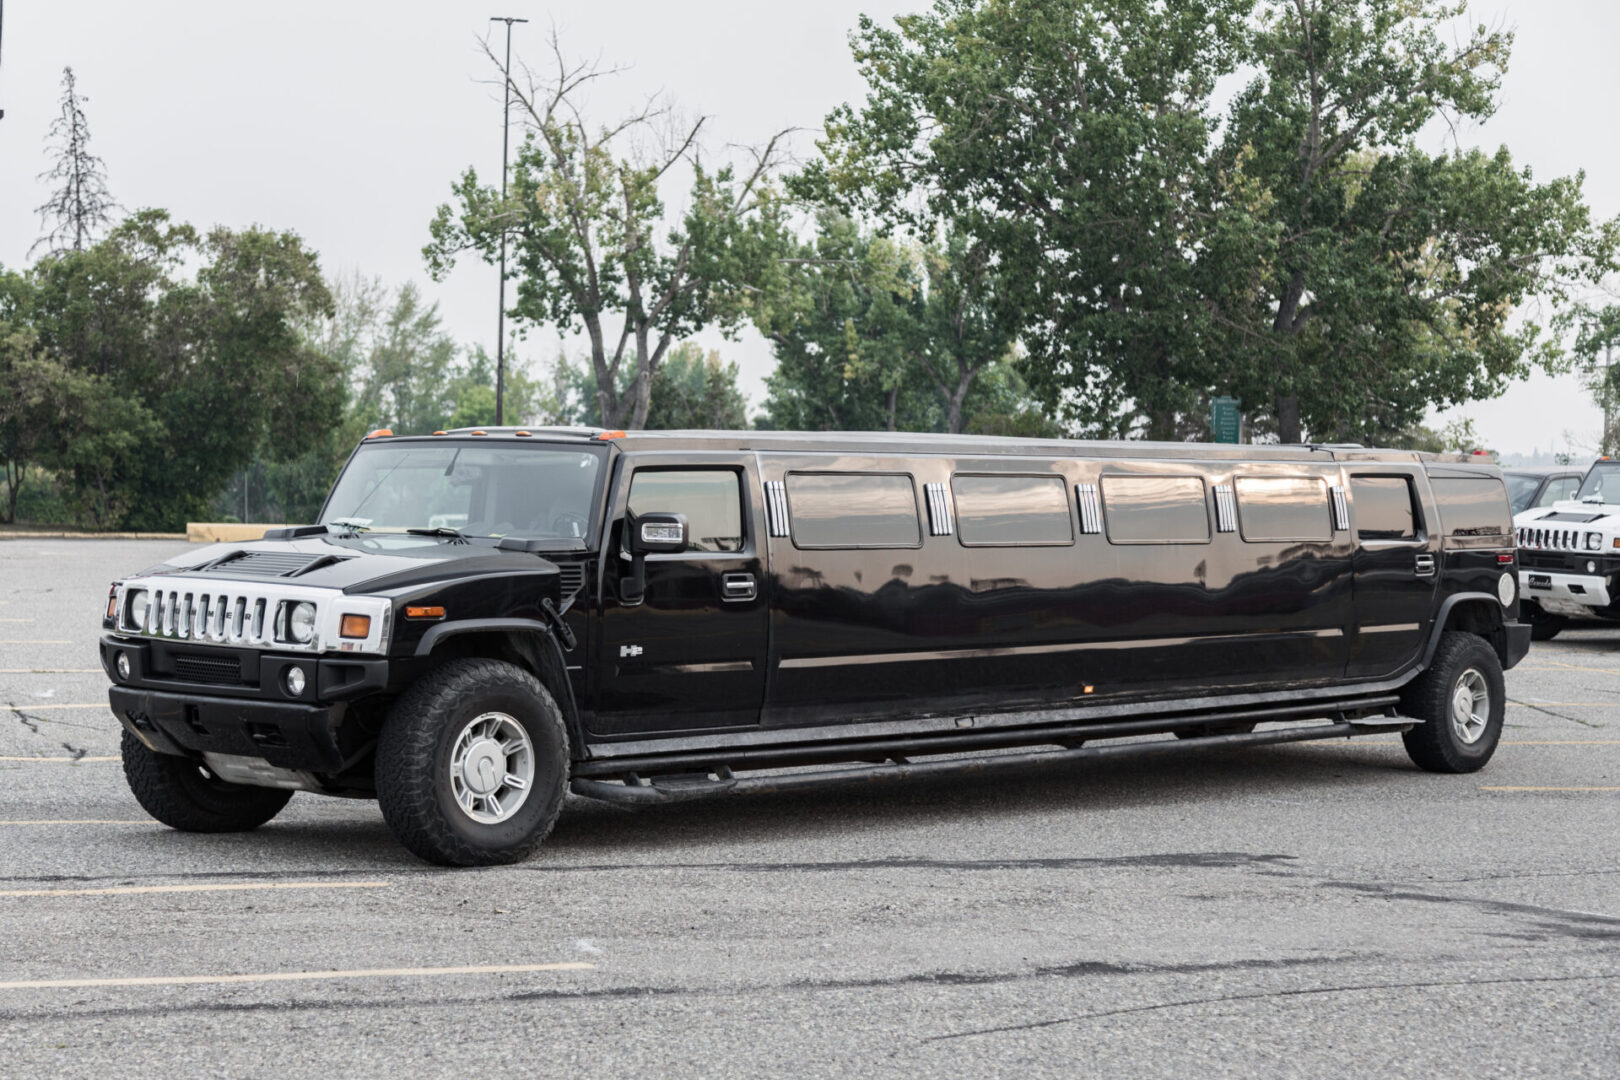 A black limo is parked in the parking lot.